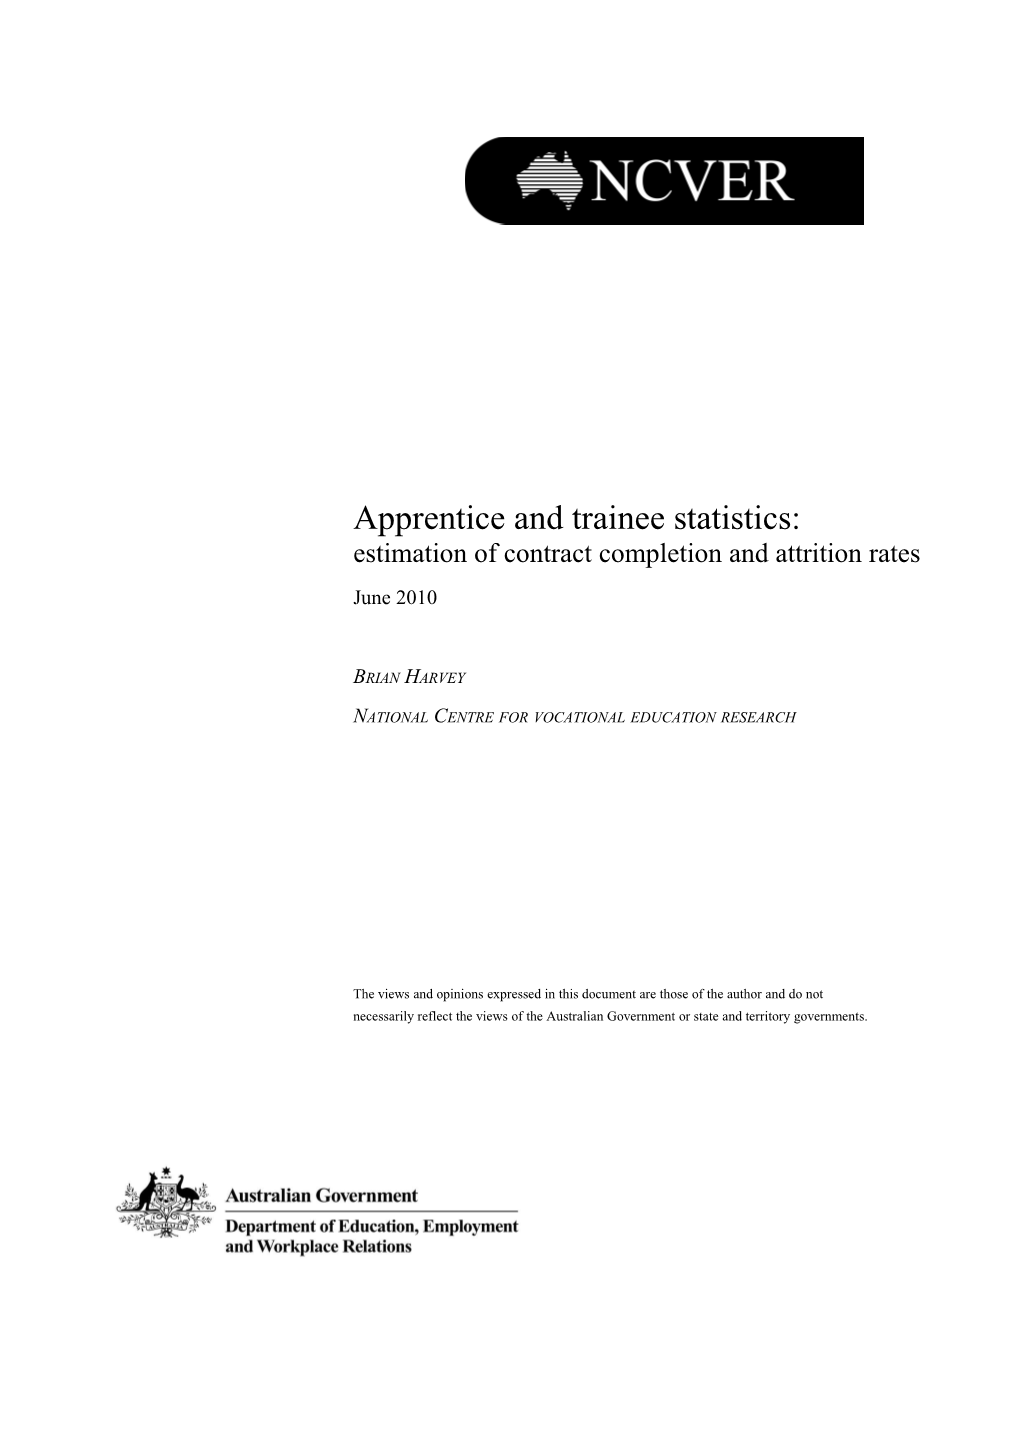 Apprentice and Trainee Statistics: Estimation of Contract Completion and Attrition Rates